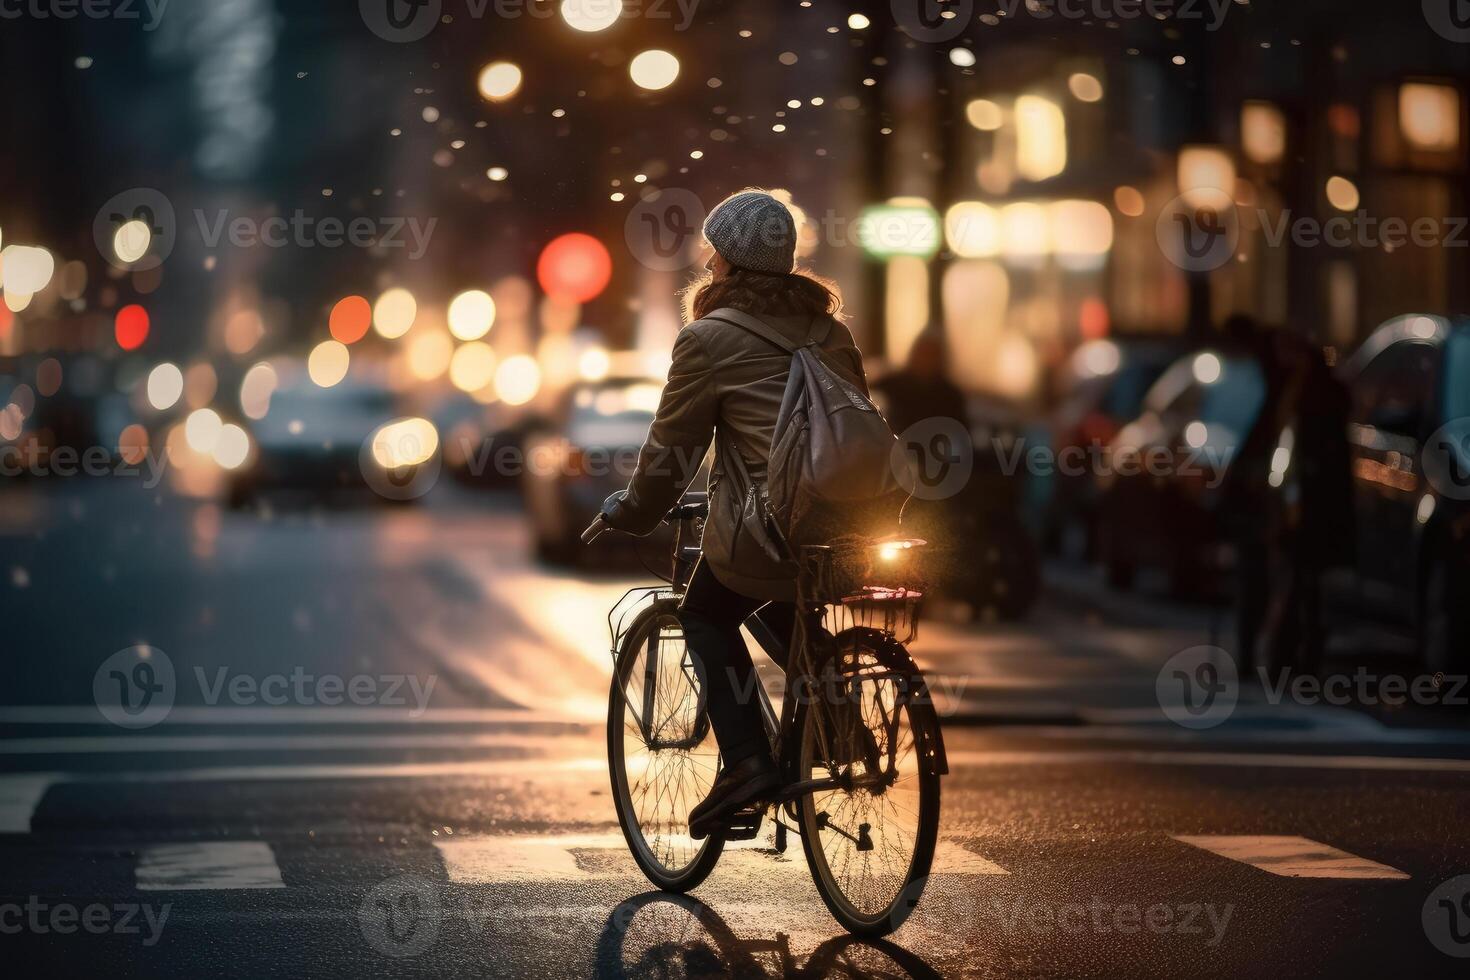 Photo of a person riding a bike in the city crowd under the lights at night in the city, and among the crowds of people. .